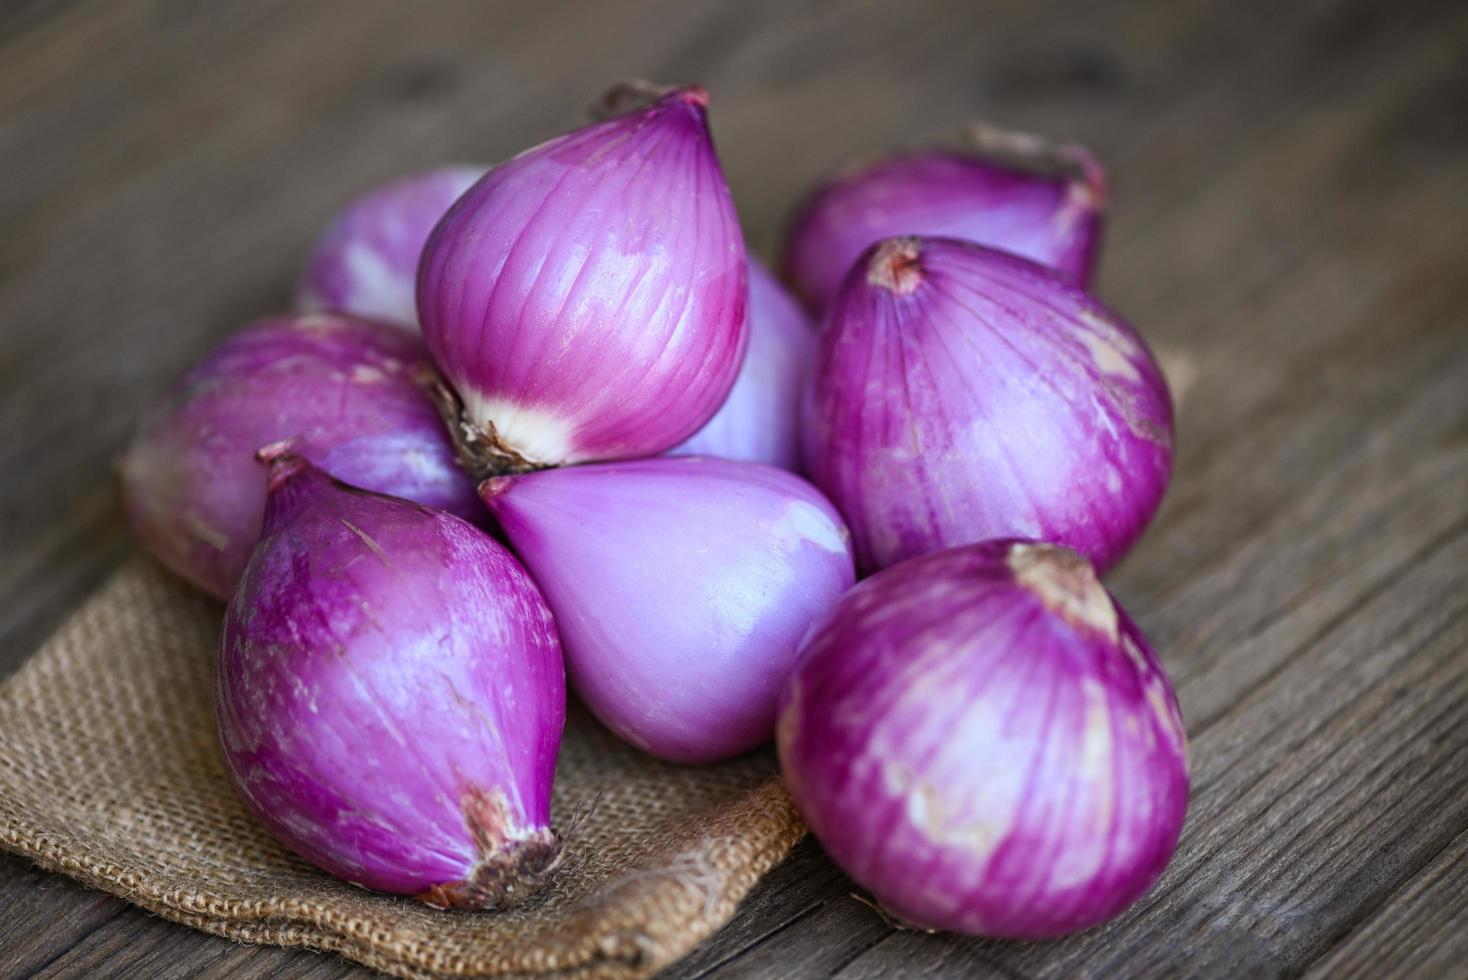 Shallots or red onion, purple shallots on wooden background , fresh shallot for medicinal products or herbs and spices Thai food made from this raw shallot photo